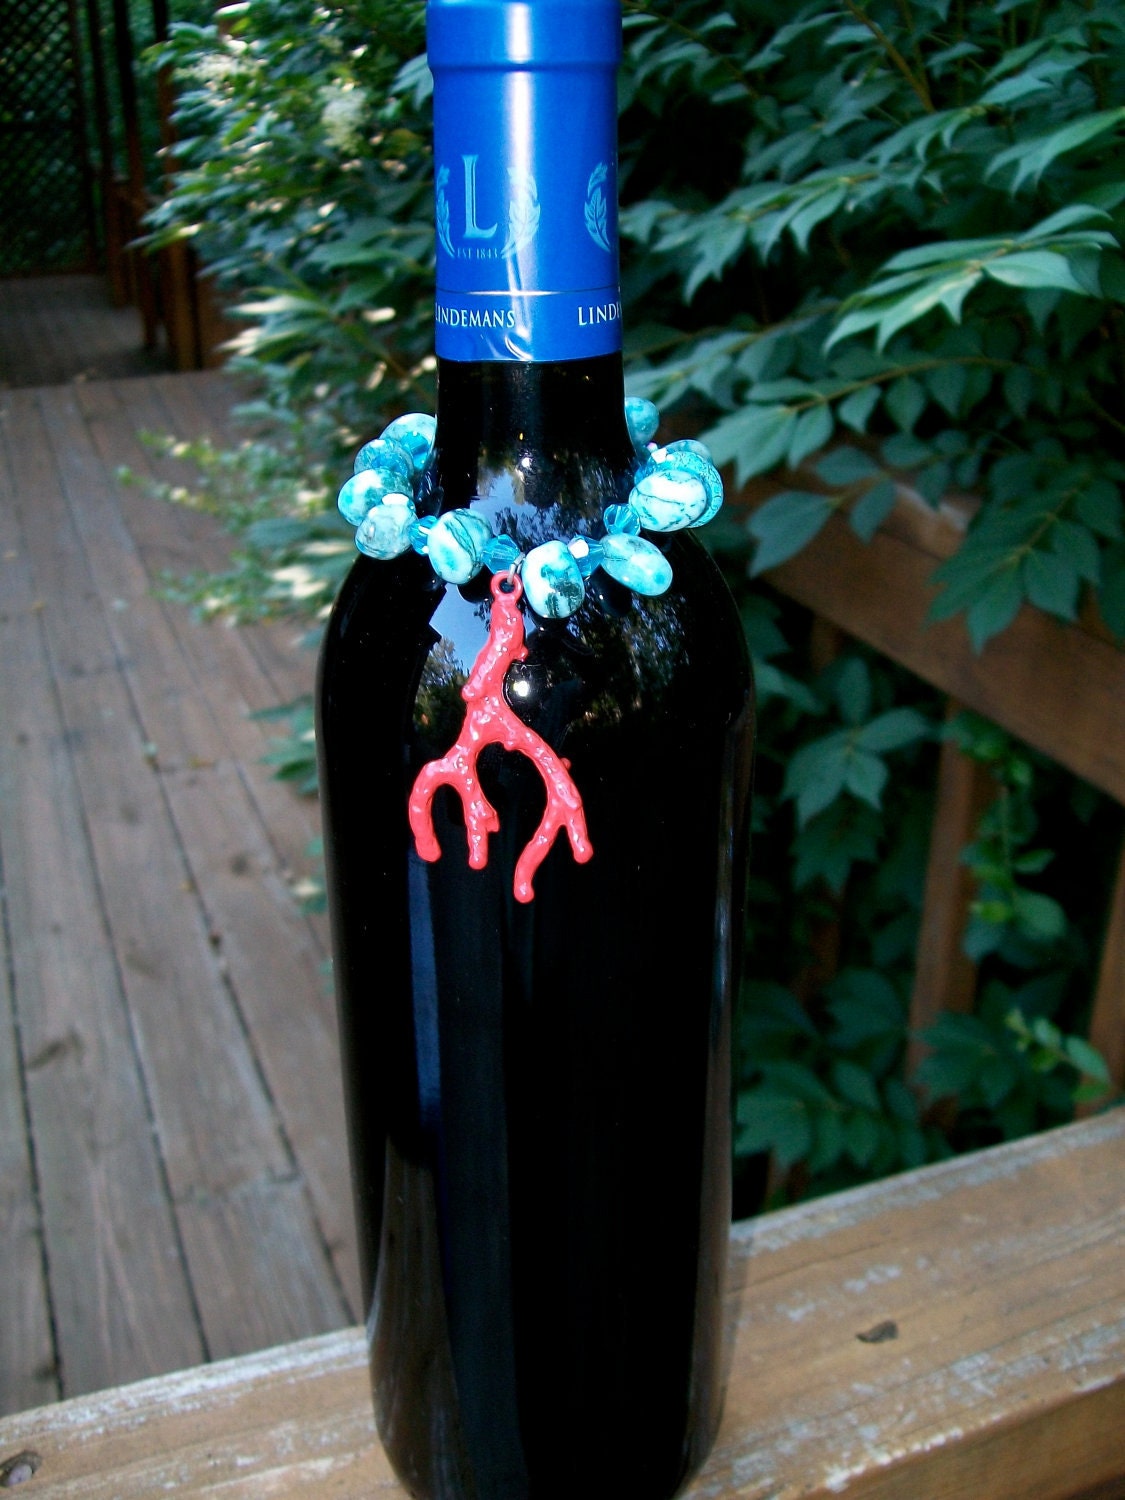 Red ocean coral wine id / bottle necklace / bottle charm - Unique handmade pieces for the wine lover in your life....